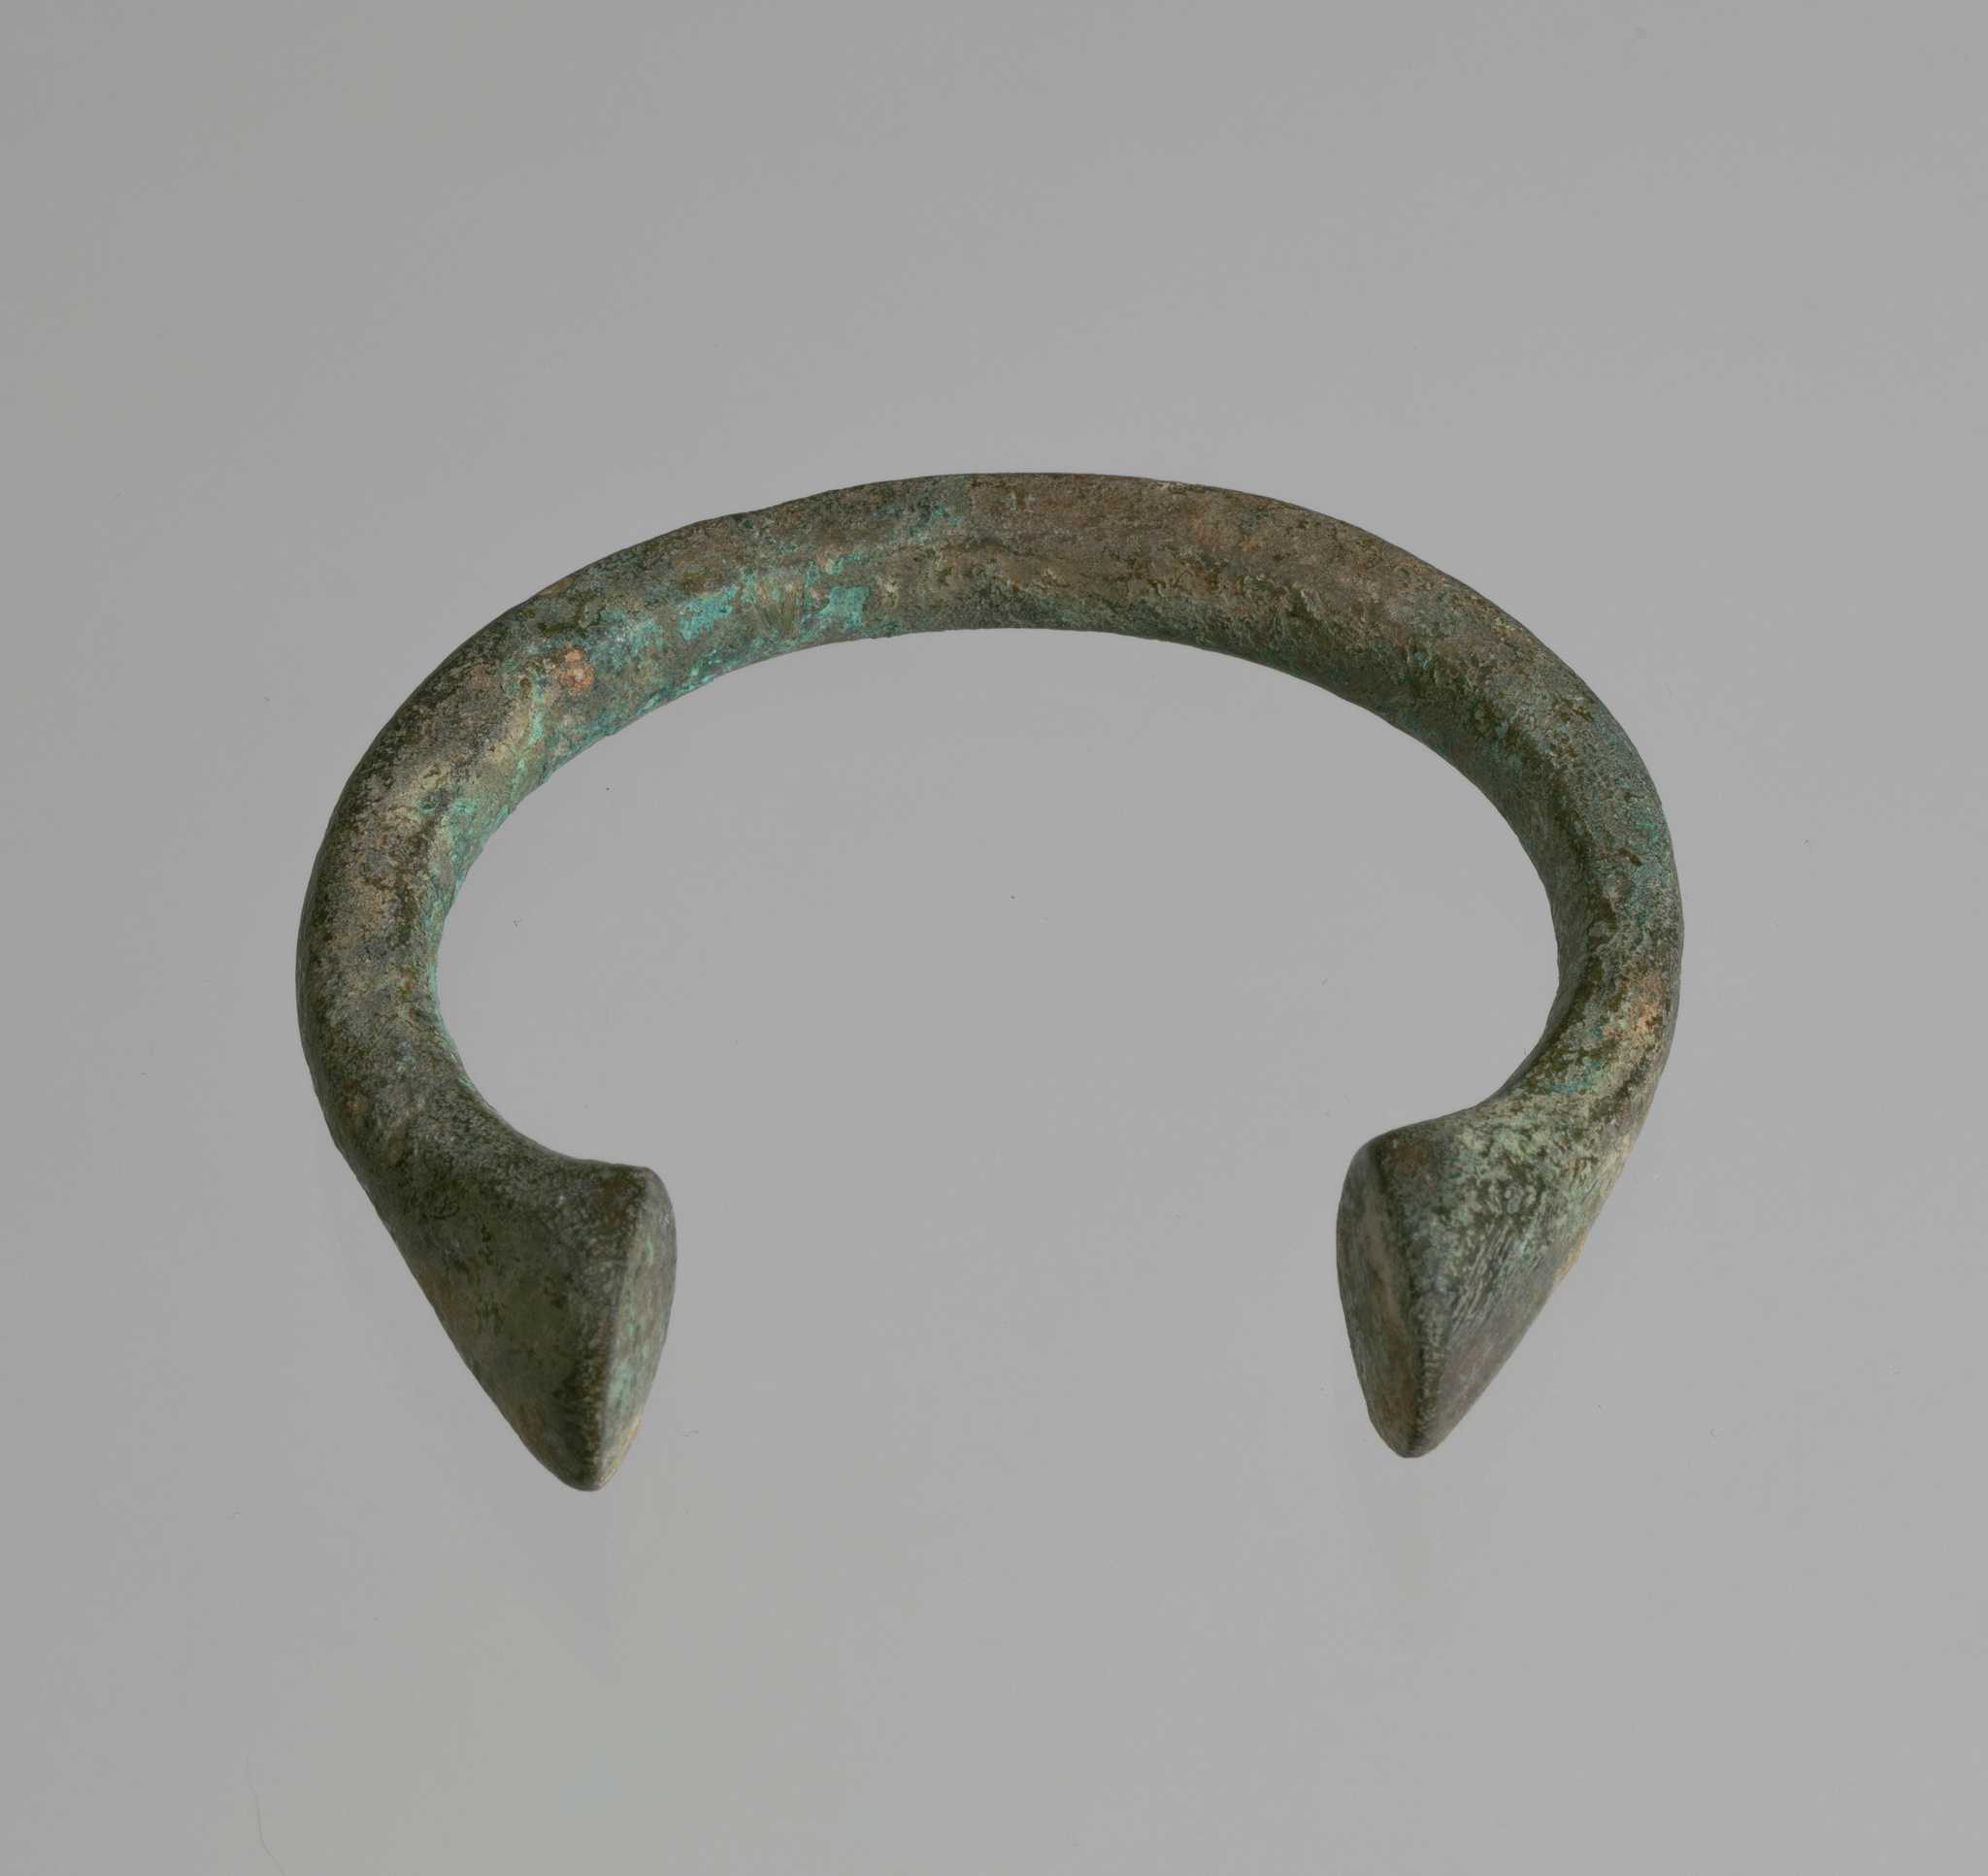 A green tarnished, semi-circular horseshoe shape manila with slight flairs at ends is on display..